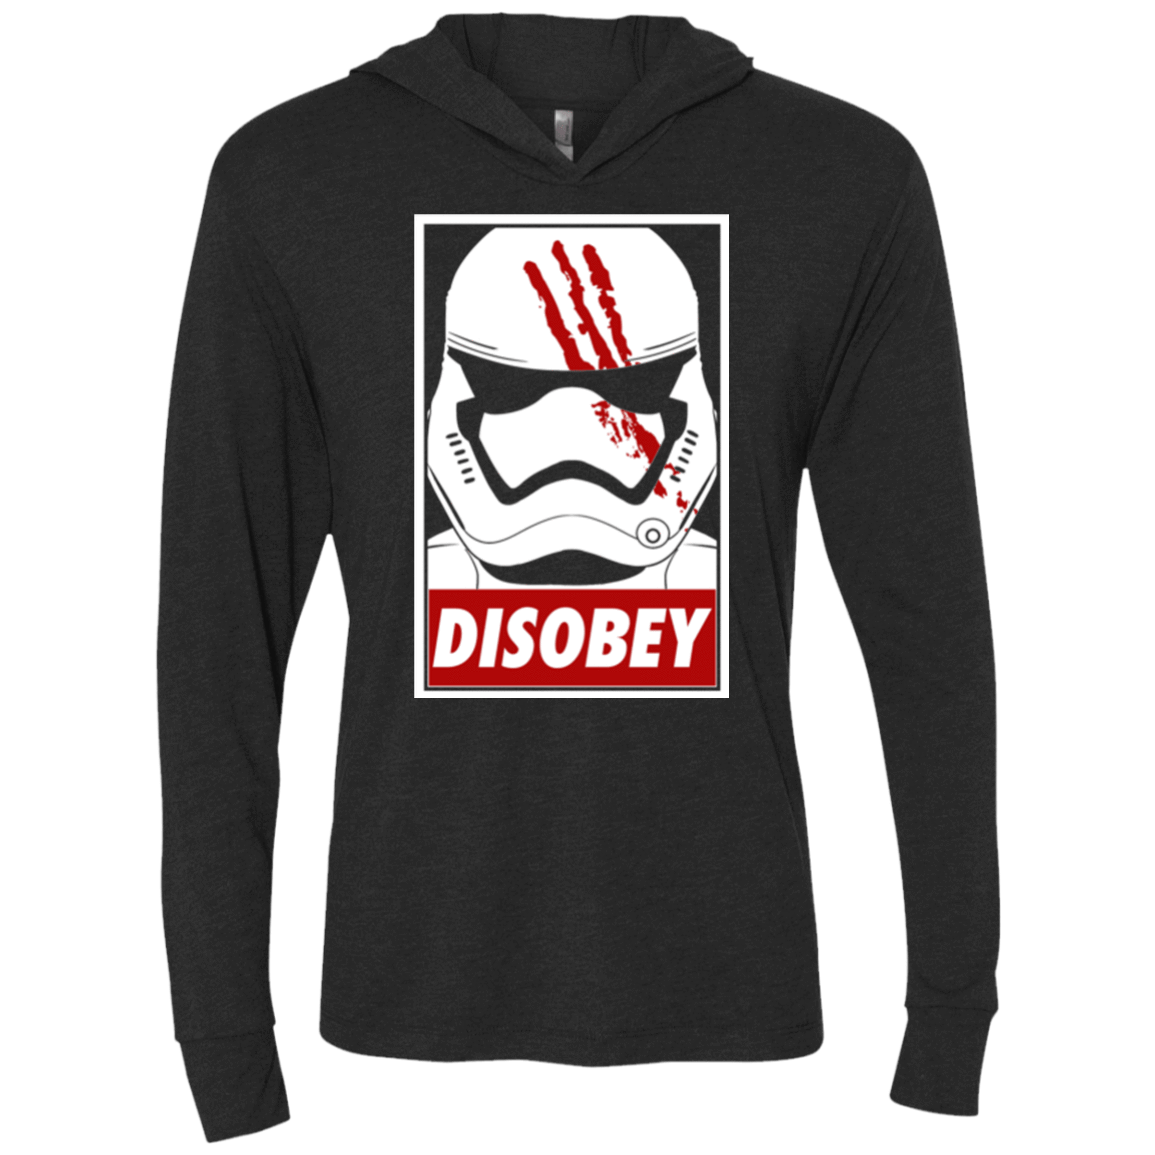 T-Shirts Vintage Black / X-Small Disobey Triblend Long Sleeve Hoodie Tee